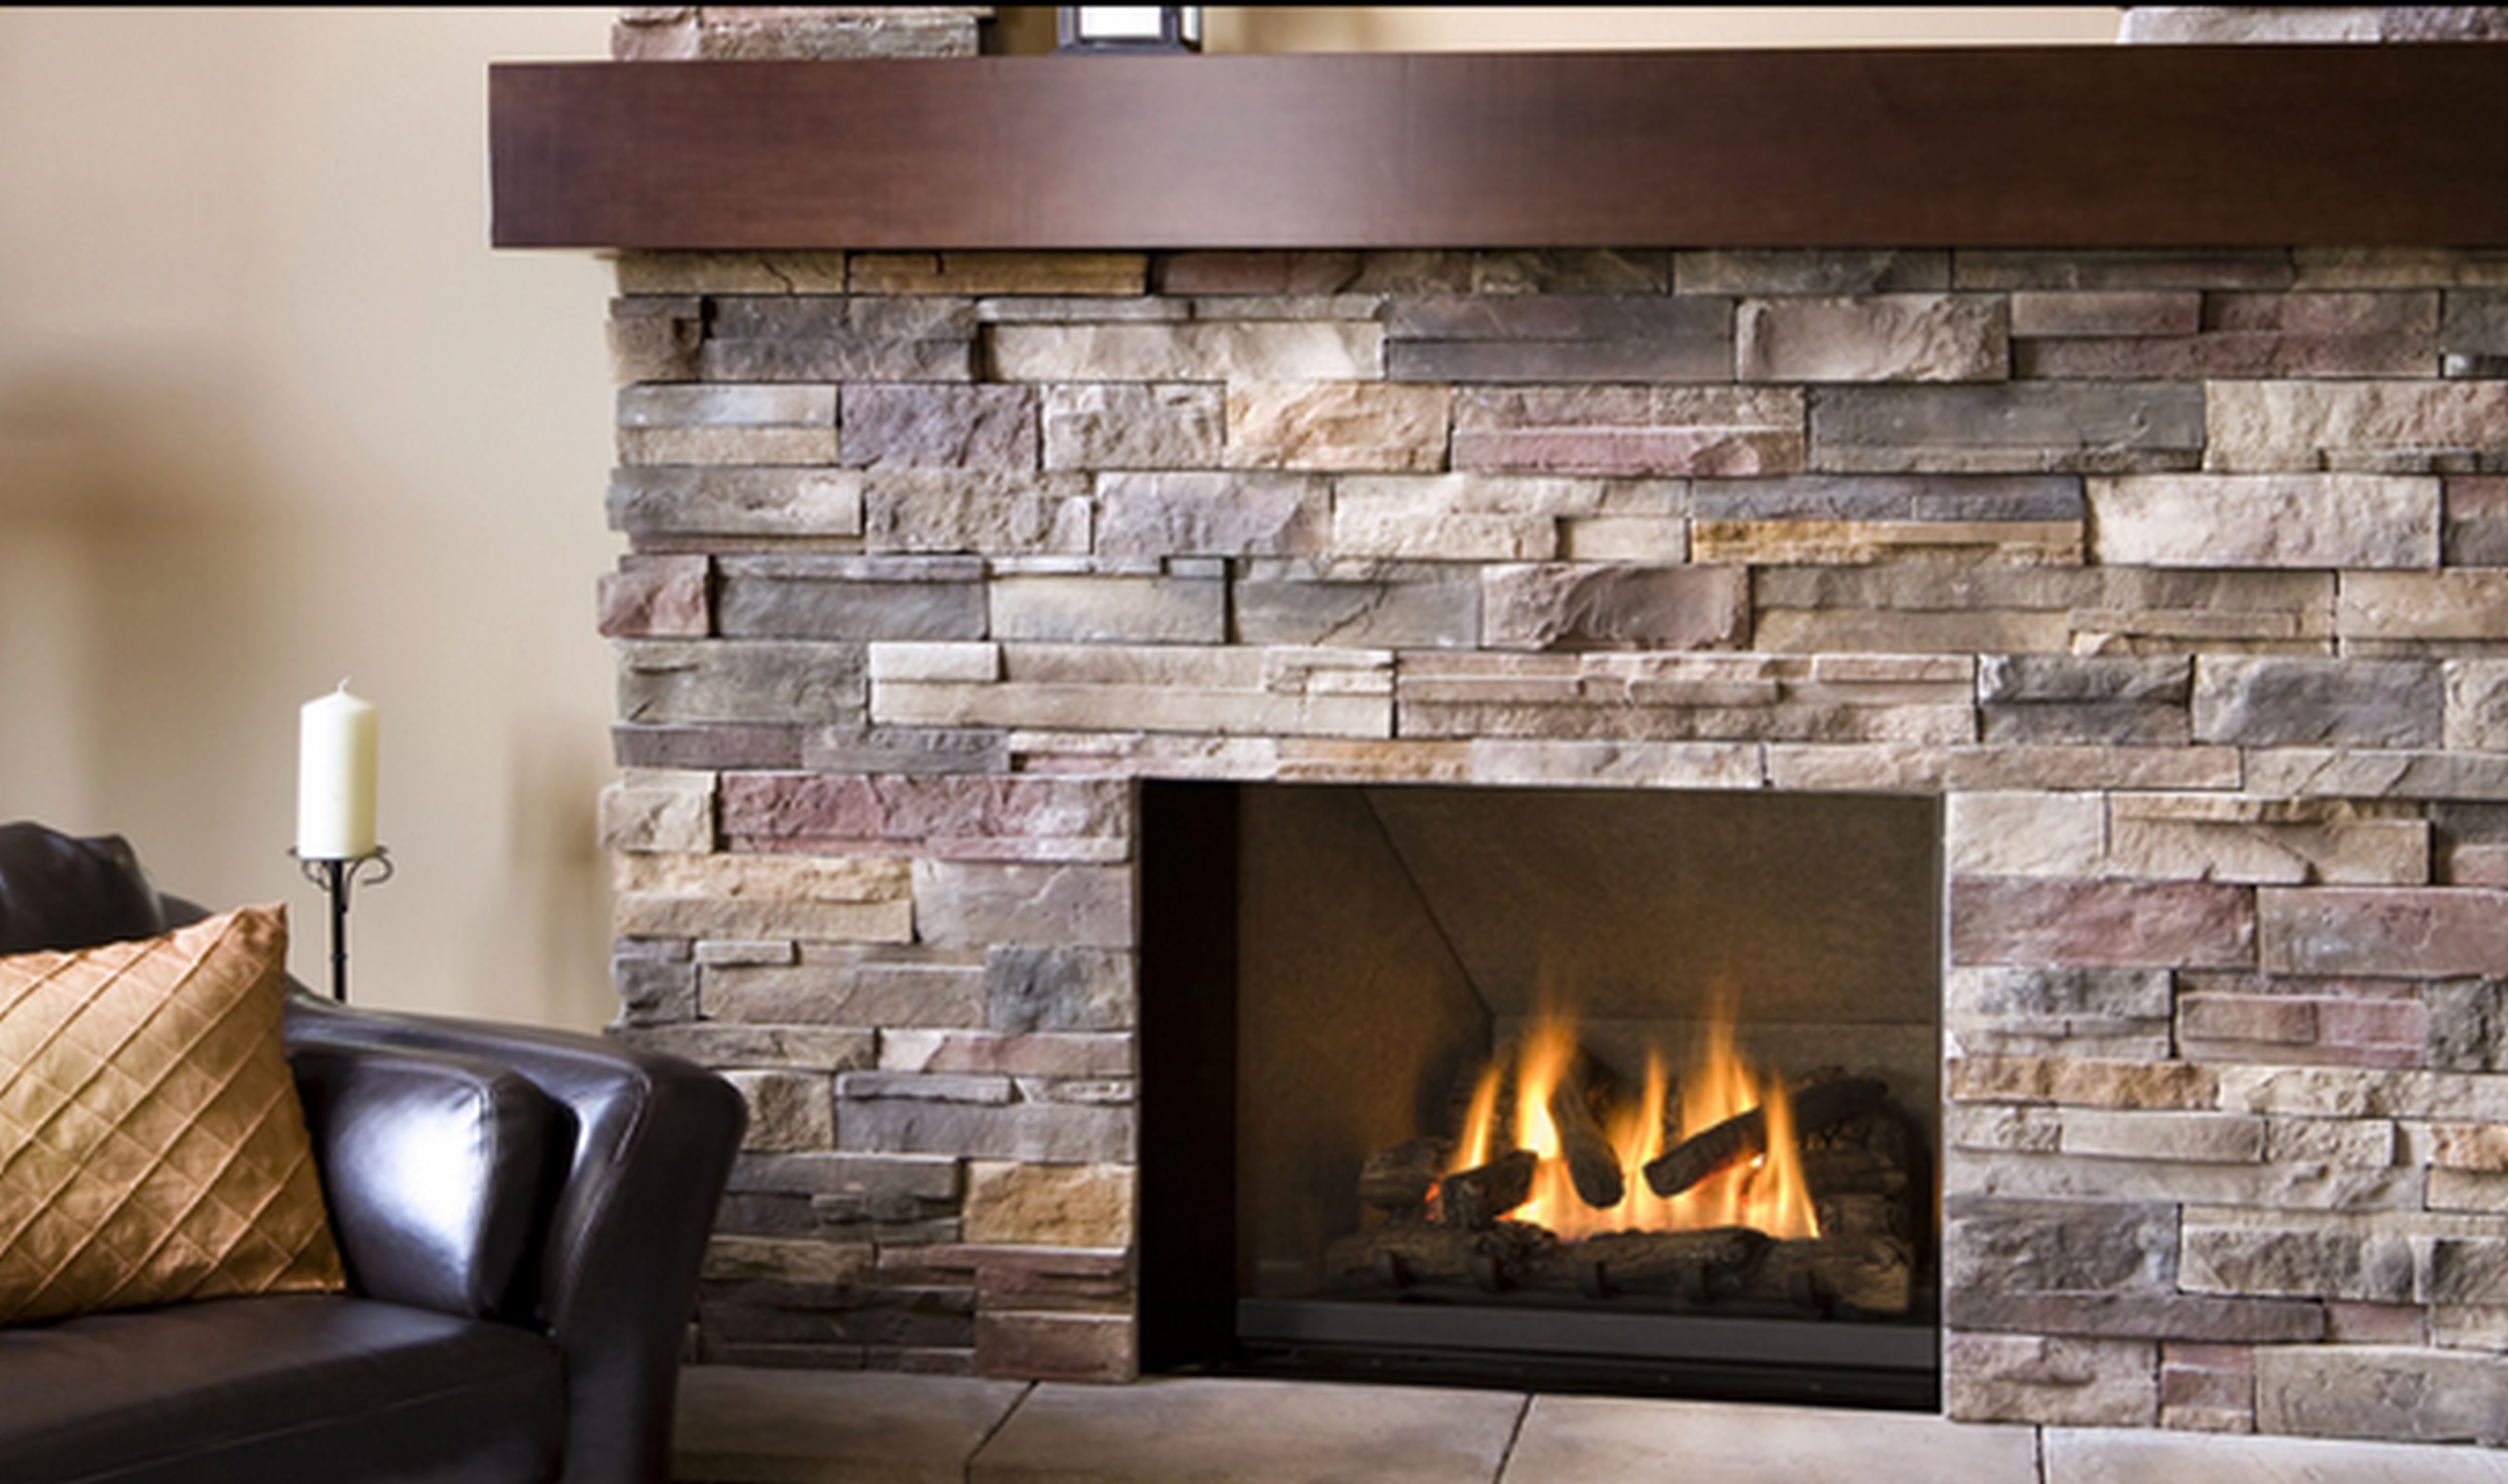  style of design ideas beautiful stone fireplace in modern contemporary